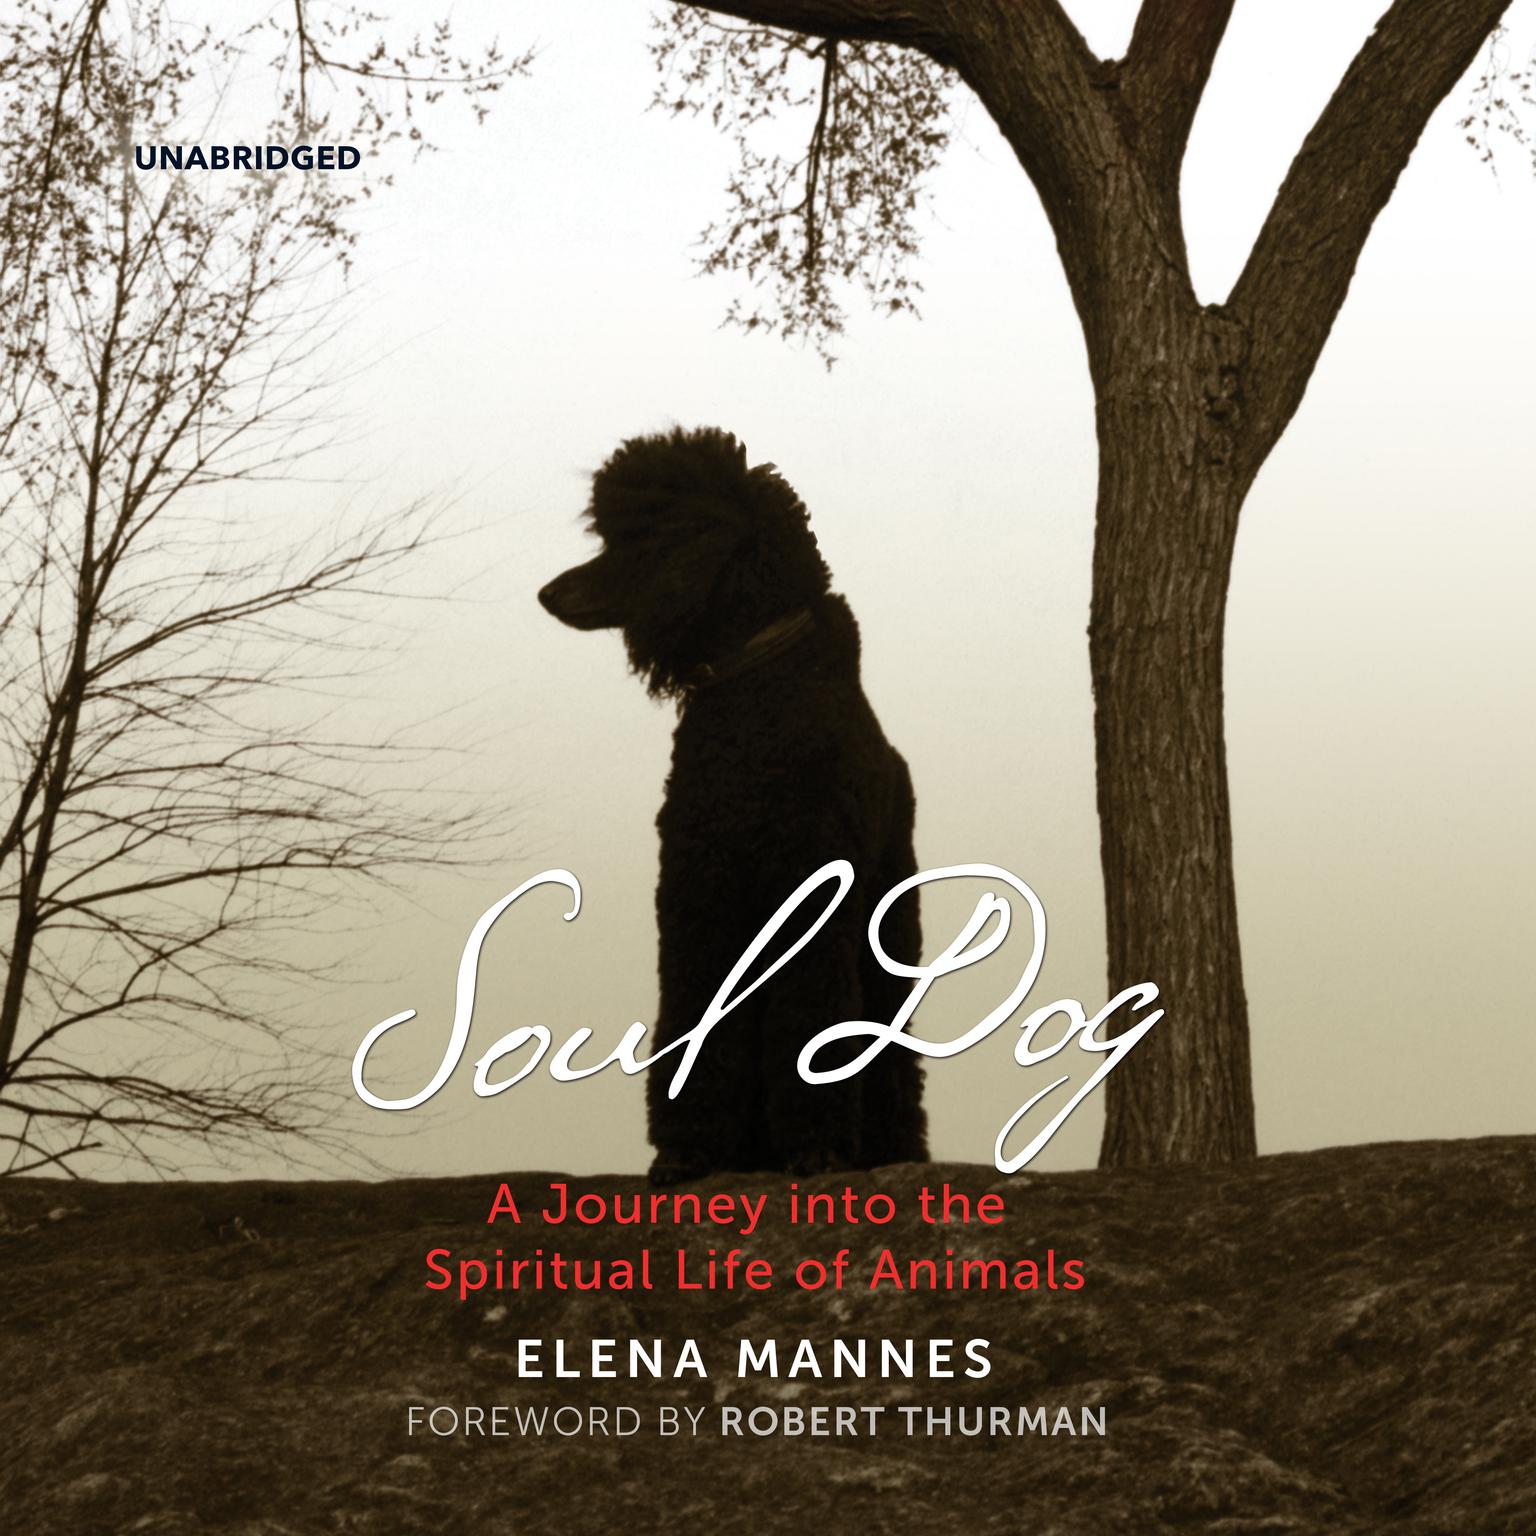 Soul Dog:  A Journey into the Spiritual Life of Animals Audiobook, by Elena Mannes